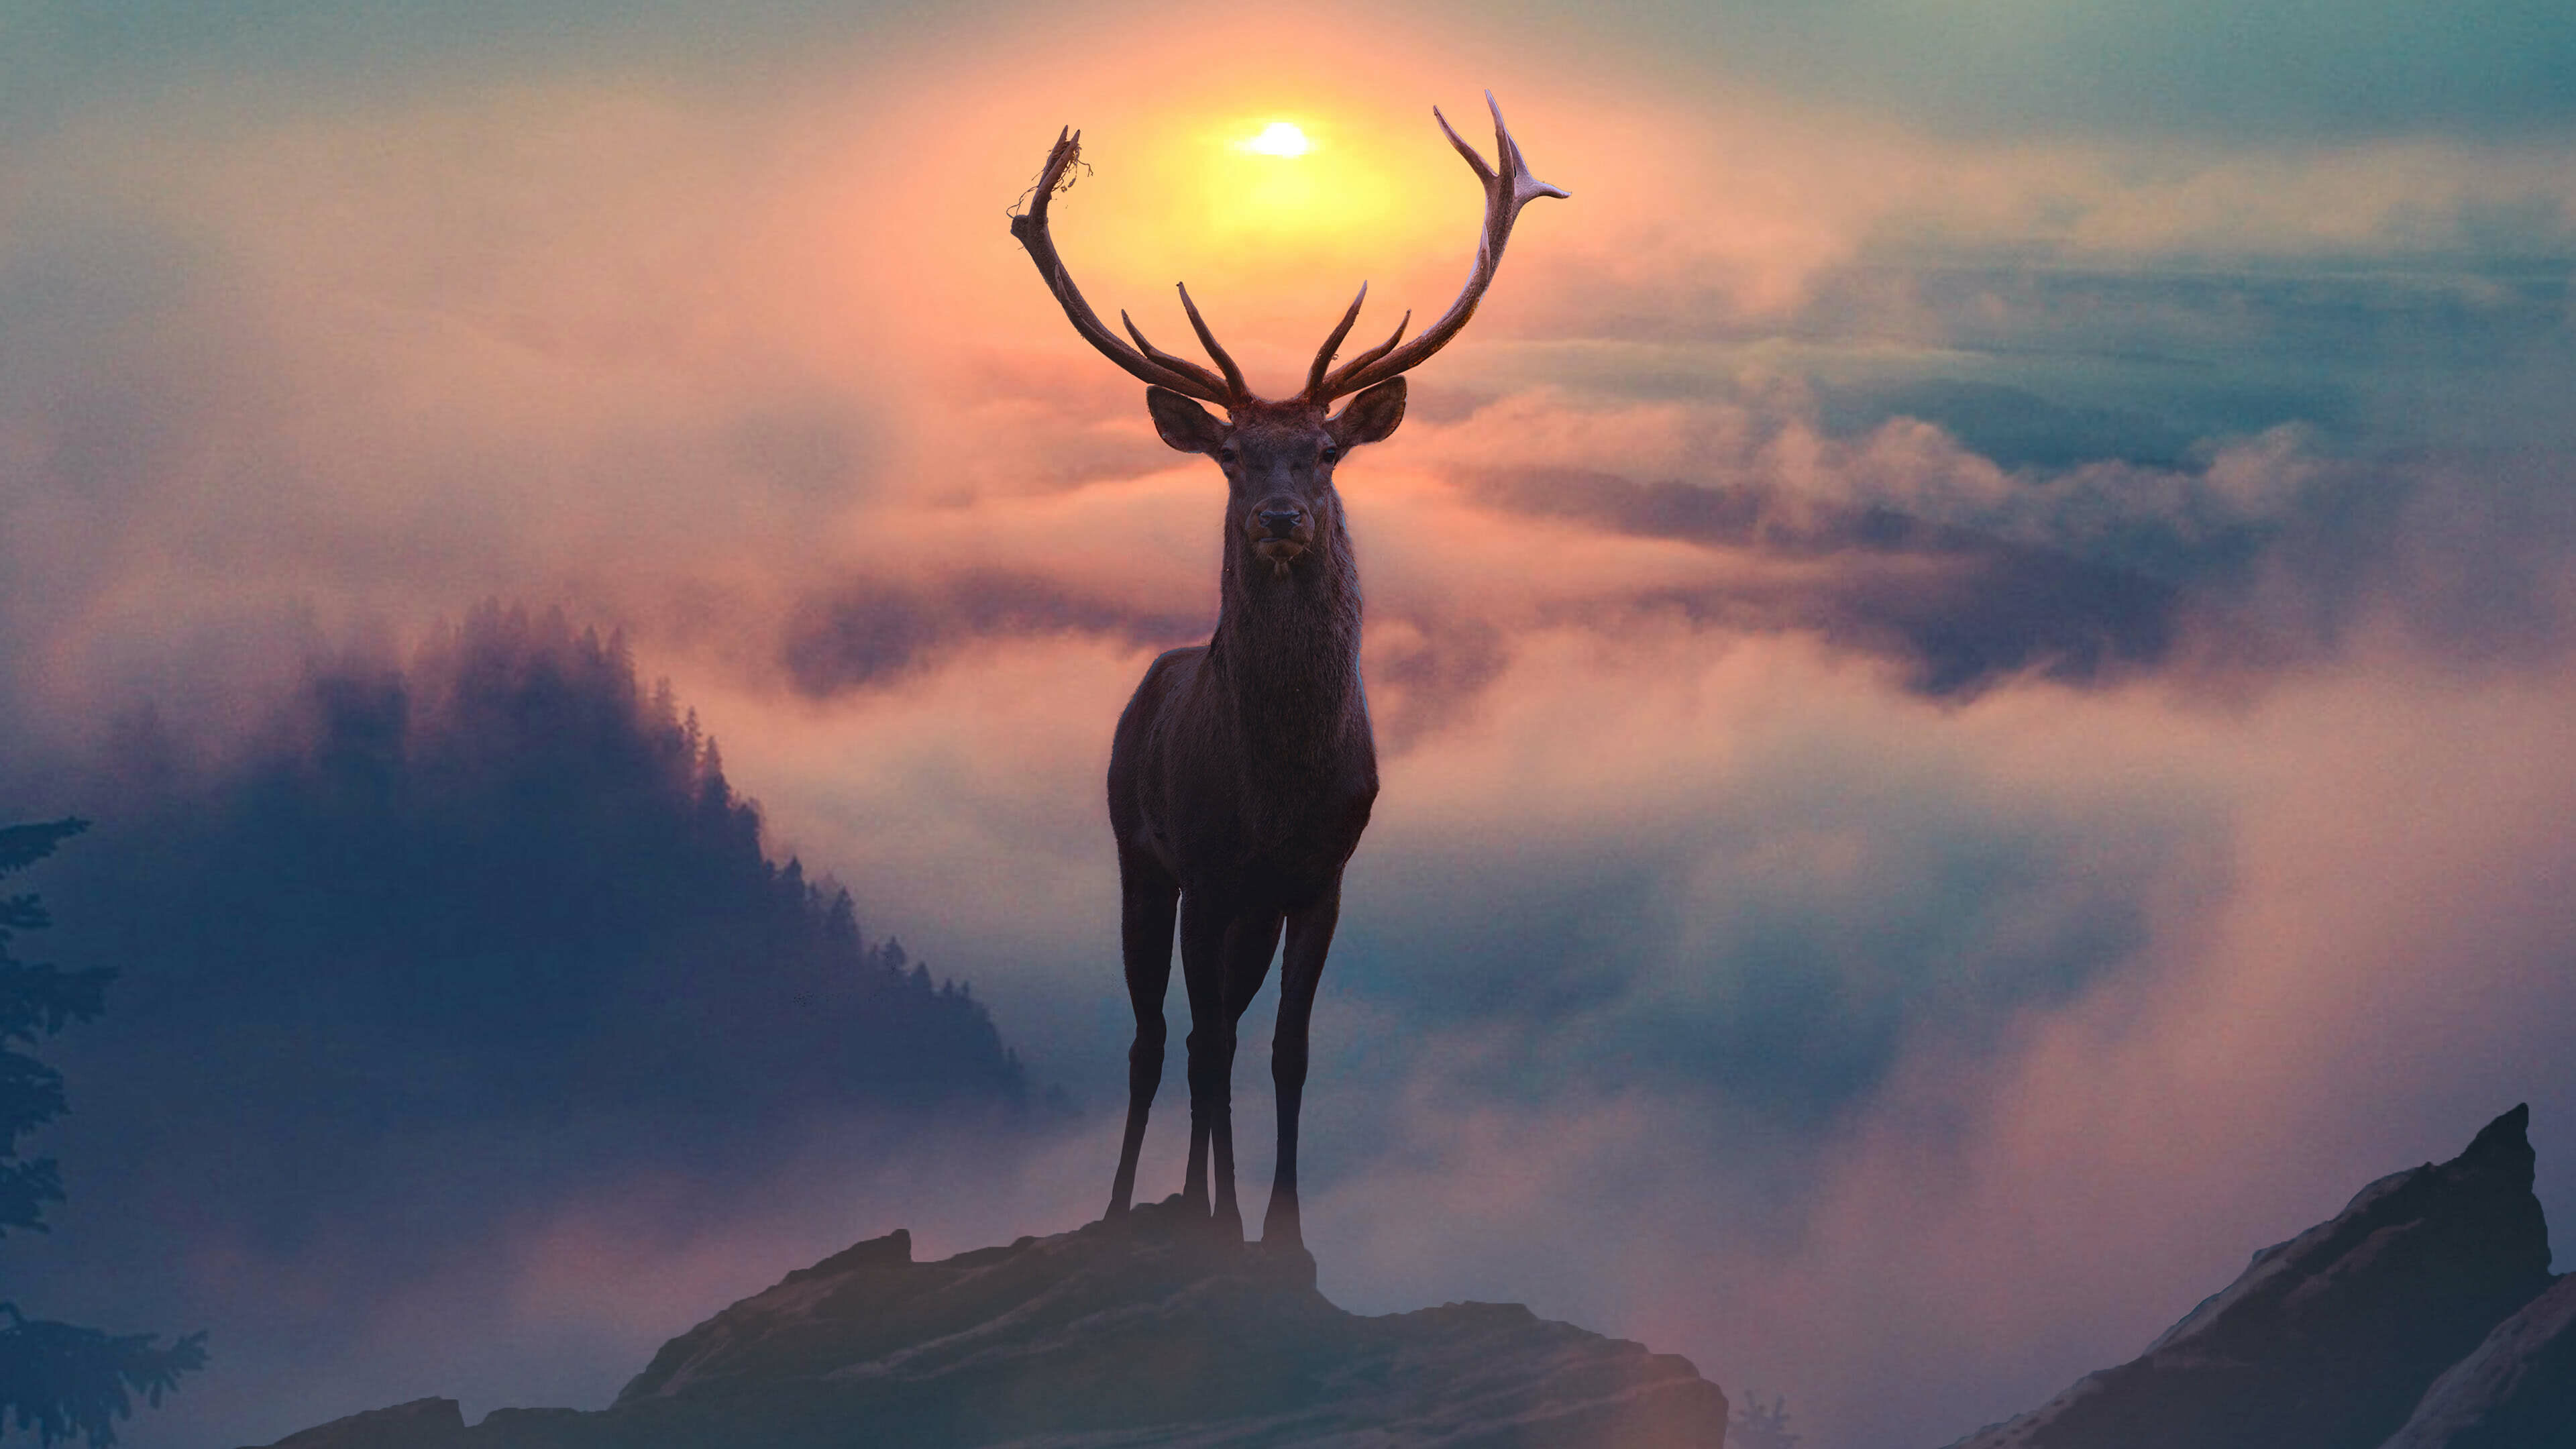 Reindeer: Mountain fog, Species vary in coat color and antler architecture. 3840x2160 4K Wallpaper.